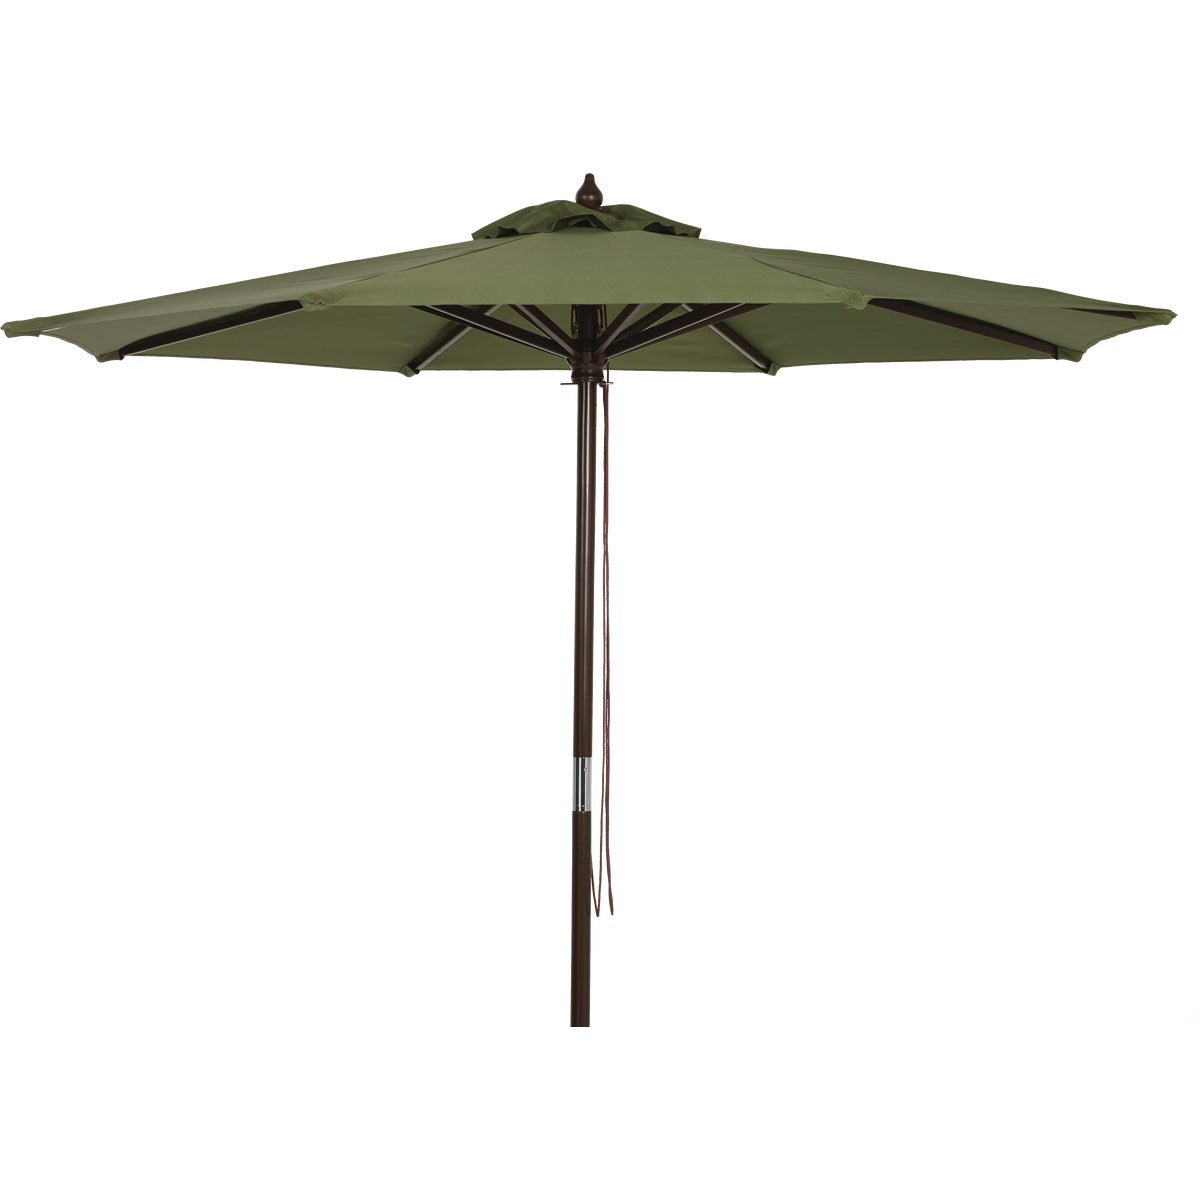 Outdoor Expressions 7.5 Ft. Pulley Heather Green Market Patio Umbrella with Chrome Plated Hardware